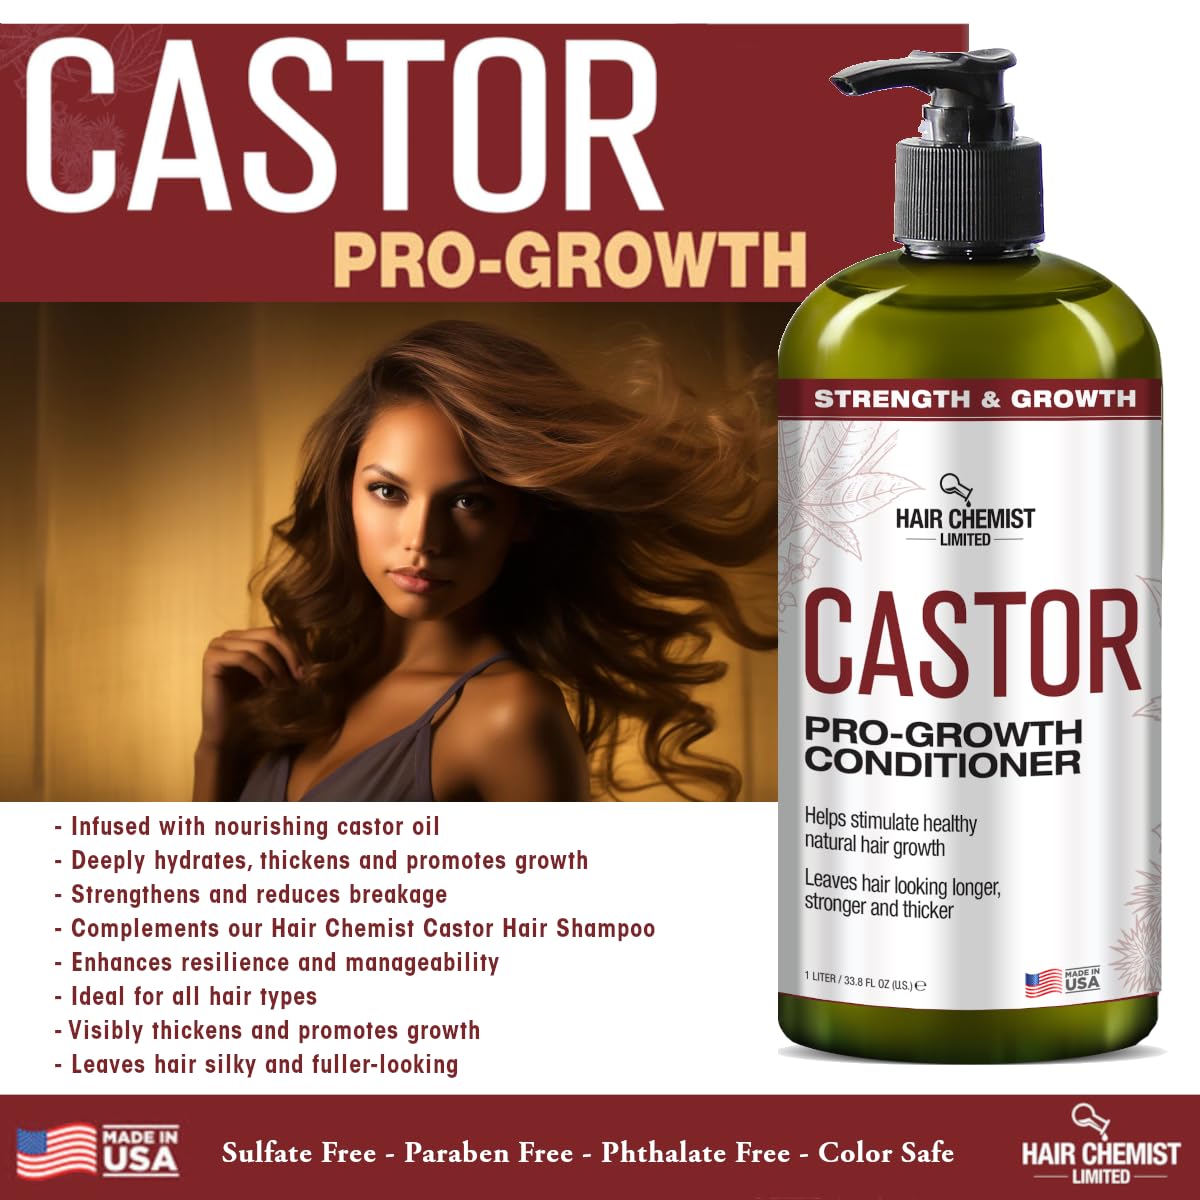 Hair Chemist Castor Pro-Growth Conditioner 33.8 oz. - Nourishing Conditioner with Castor Oil